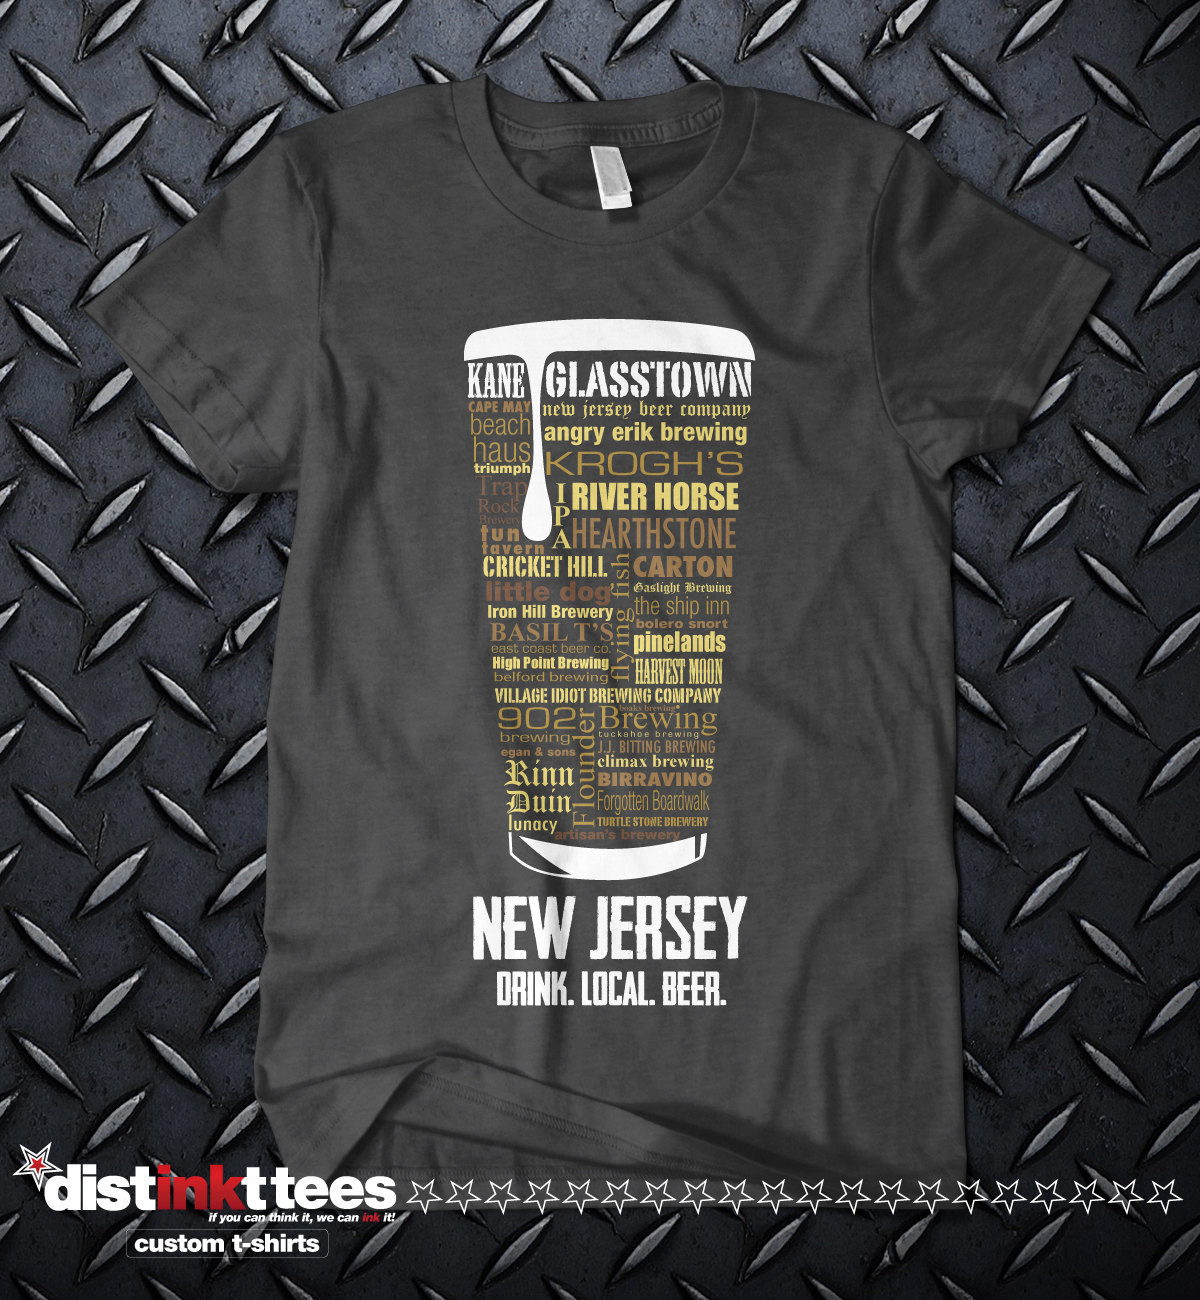 New Jersey State Craft Beer Custom Shirt designed by Distinkt Tees Ink